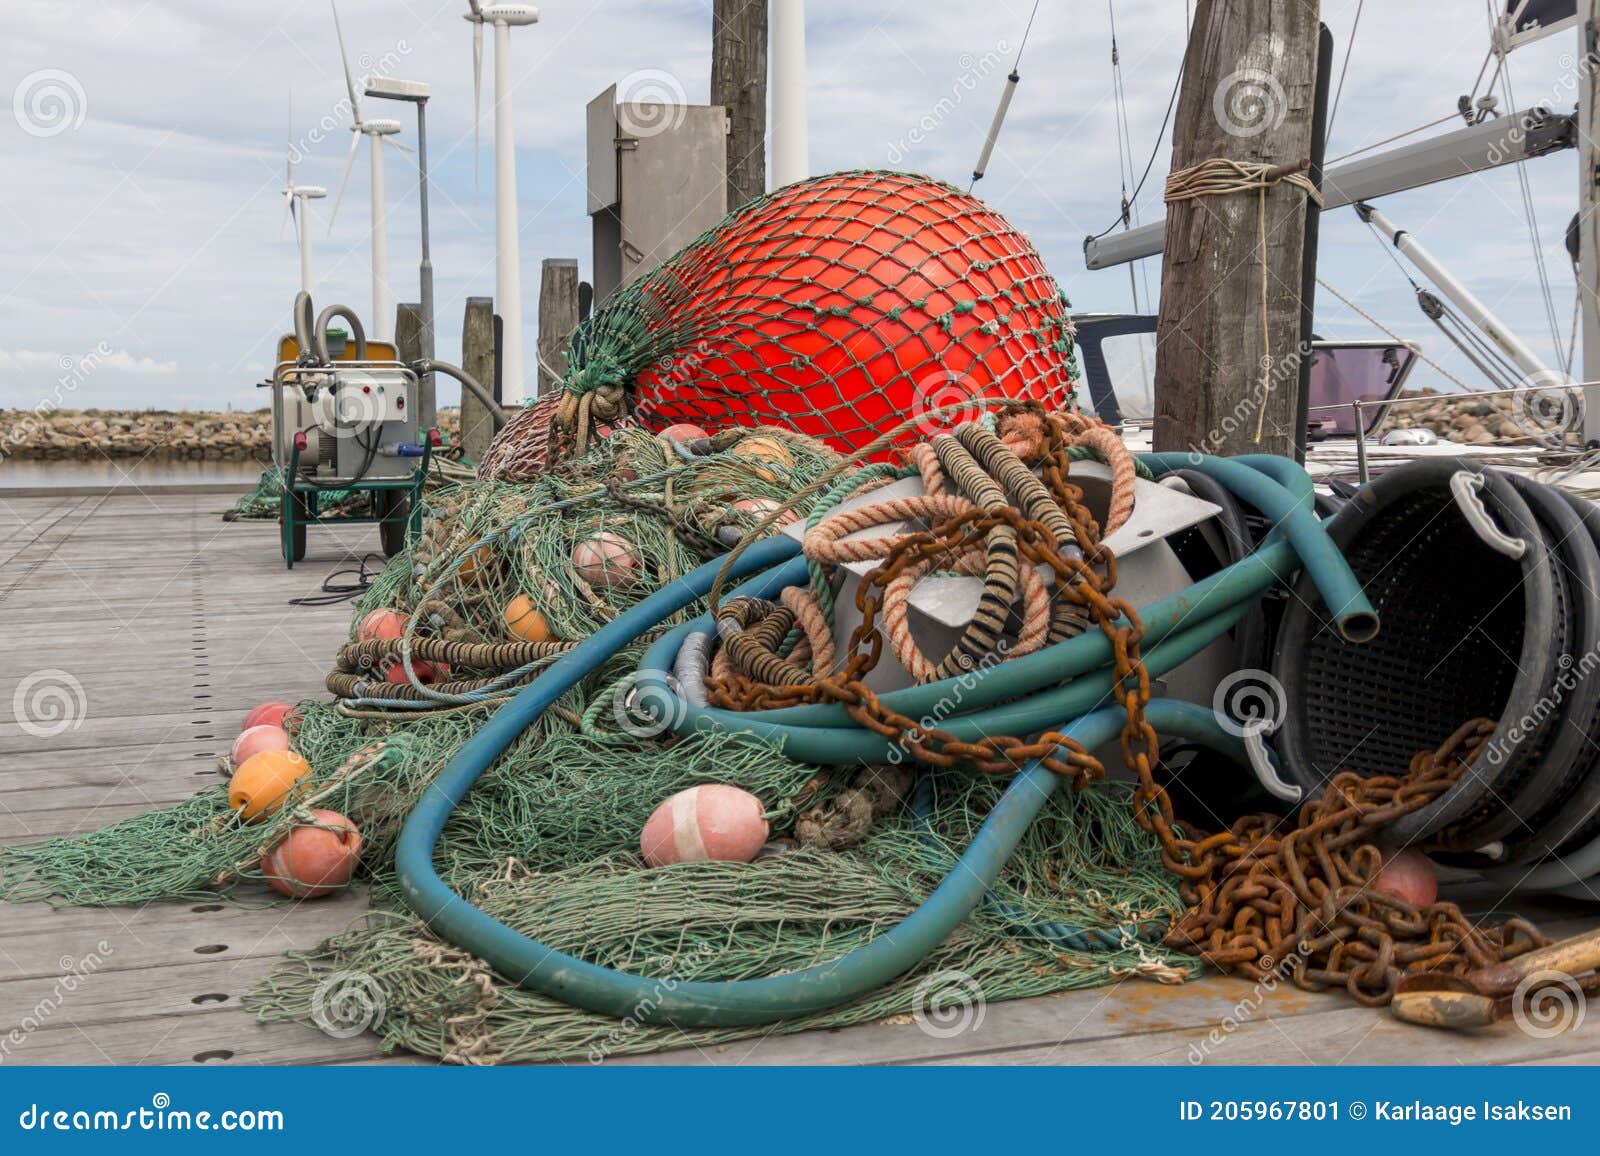 Equipment for a Fishing Cutter, Equipment for Fishing from a Fishing Boat,  Fishing Nets and Fishing Equipment are on Land Ready To Stock Image - Image  of industry, boats: 205967801